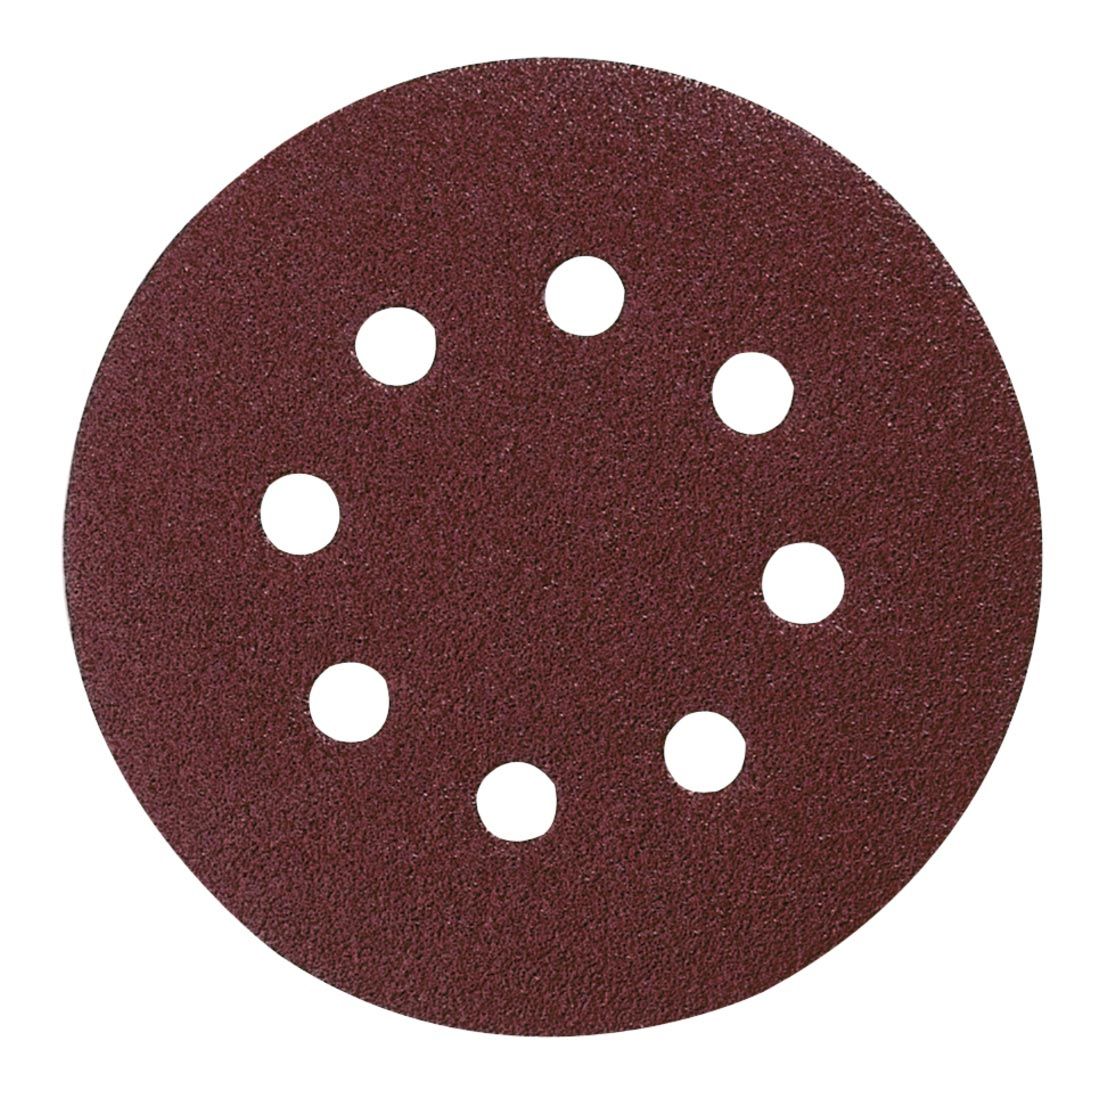 Makita P-43549 Abrasive Disc 125 Punched 60G - Pack of 10